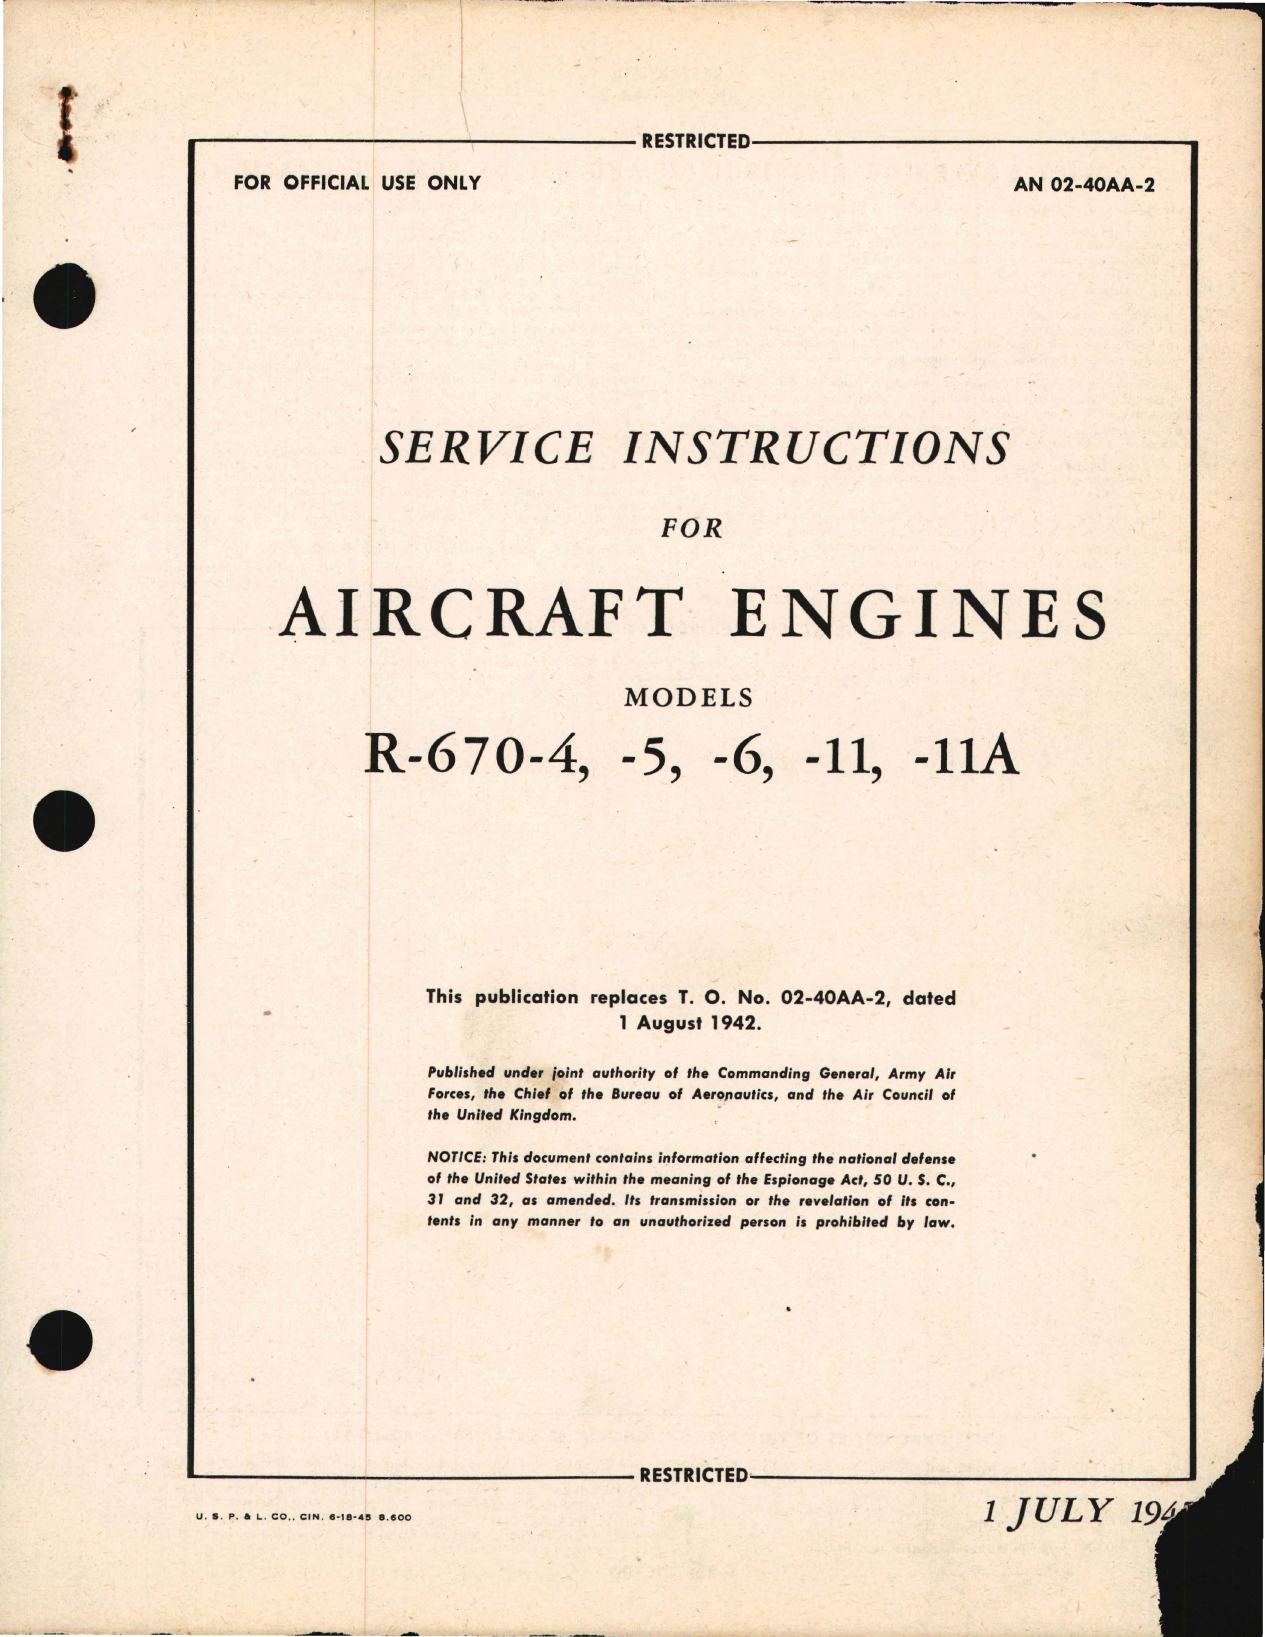 Sample page 1 from AirCorps Library document: Service Instructions for Aircraft Engines R-670-4, R-670-5, R-670-6, R-670-11, and R-670-11A